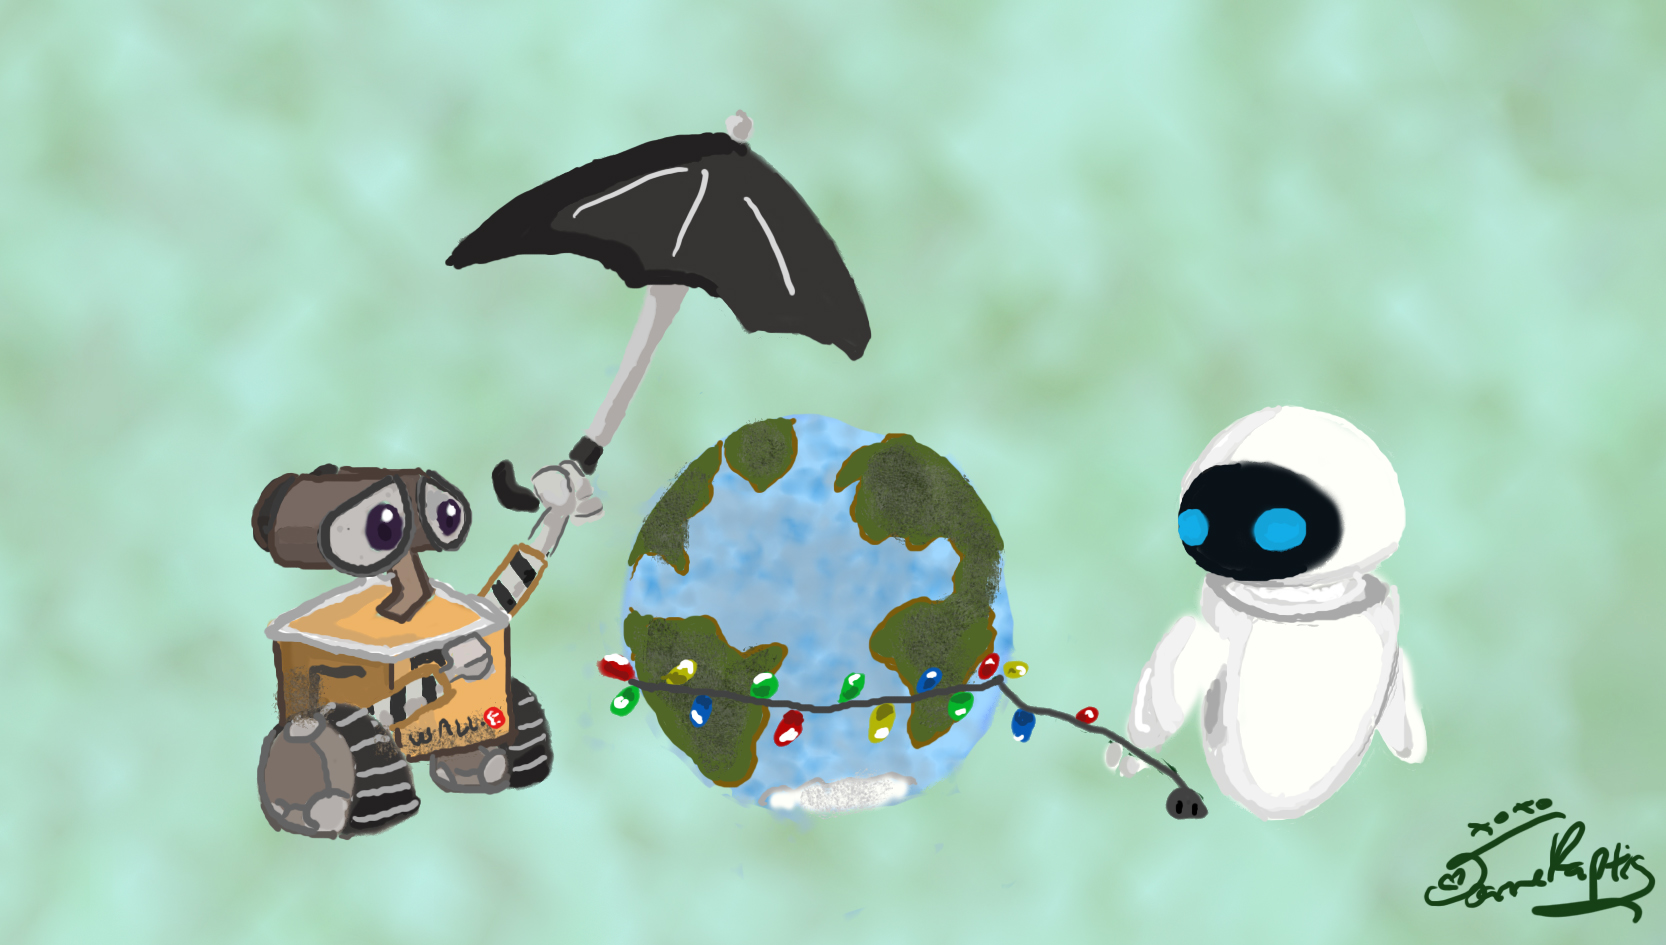 Happy_Earth_Day_from_Wall_e_by_rue789.jpg